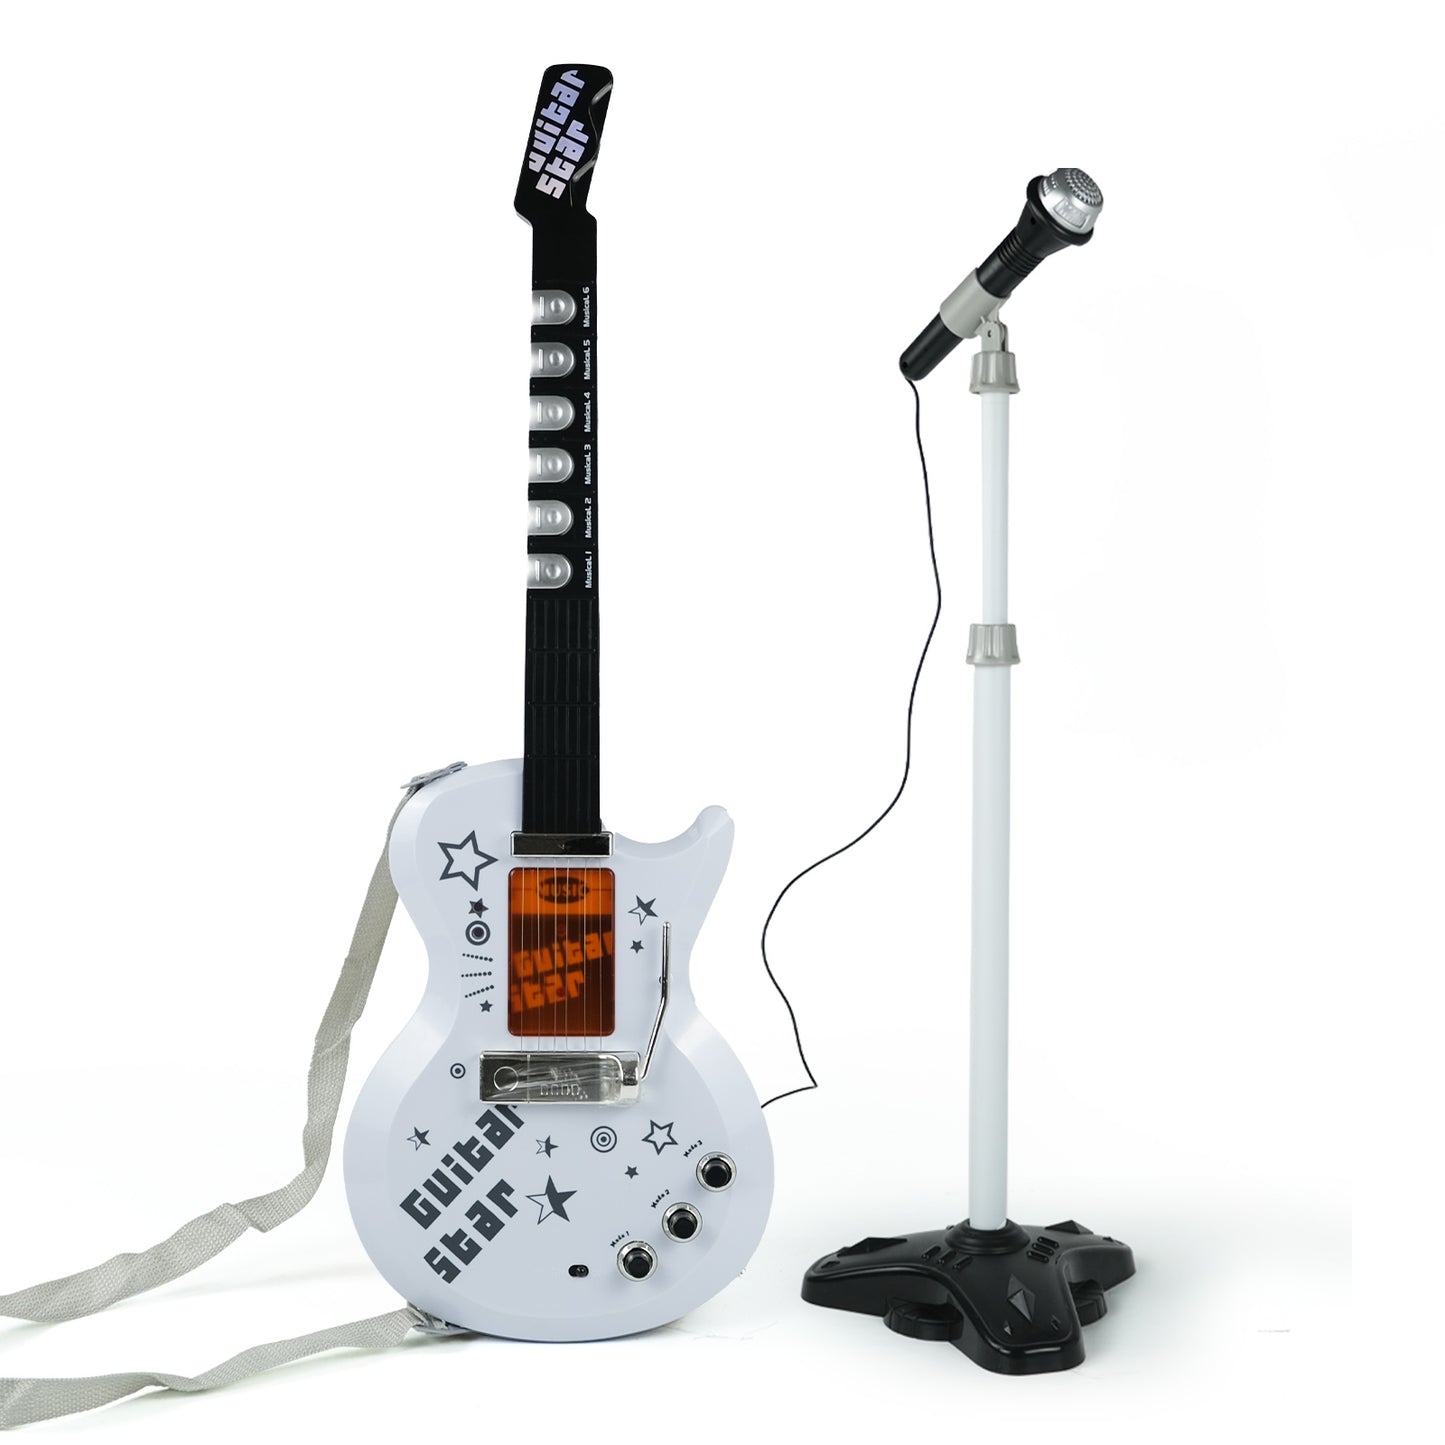 AOQIMITENJOY Musical Instrument Electronic Guitar Set Toys with Vertical Microphone LED Lighting Karaoke Birthday Gifts for Boys and Girls 3 Year Old+ HK-9010C